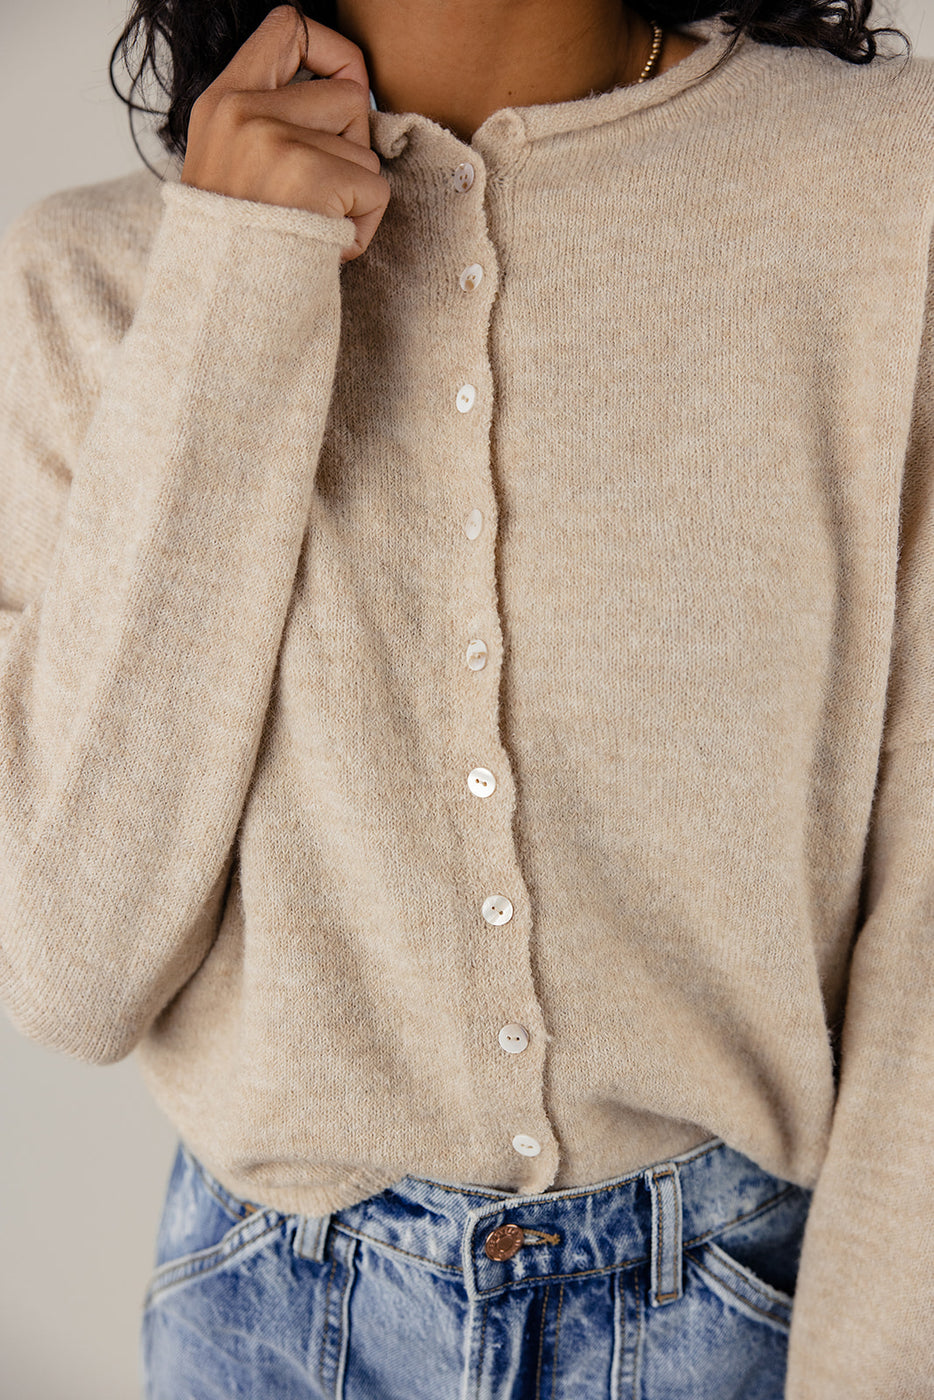 Cardigan with Buttons | ROOLEE